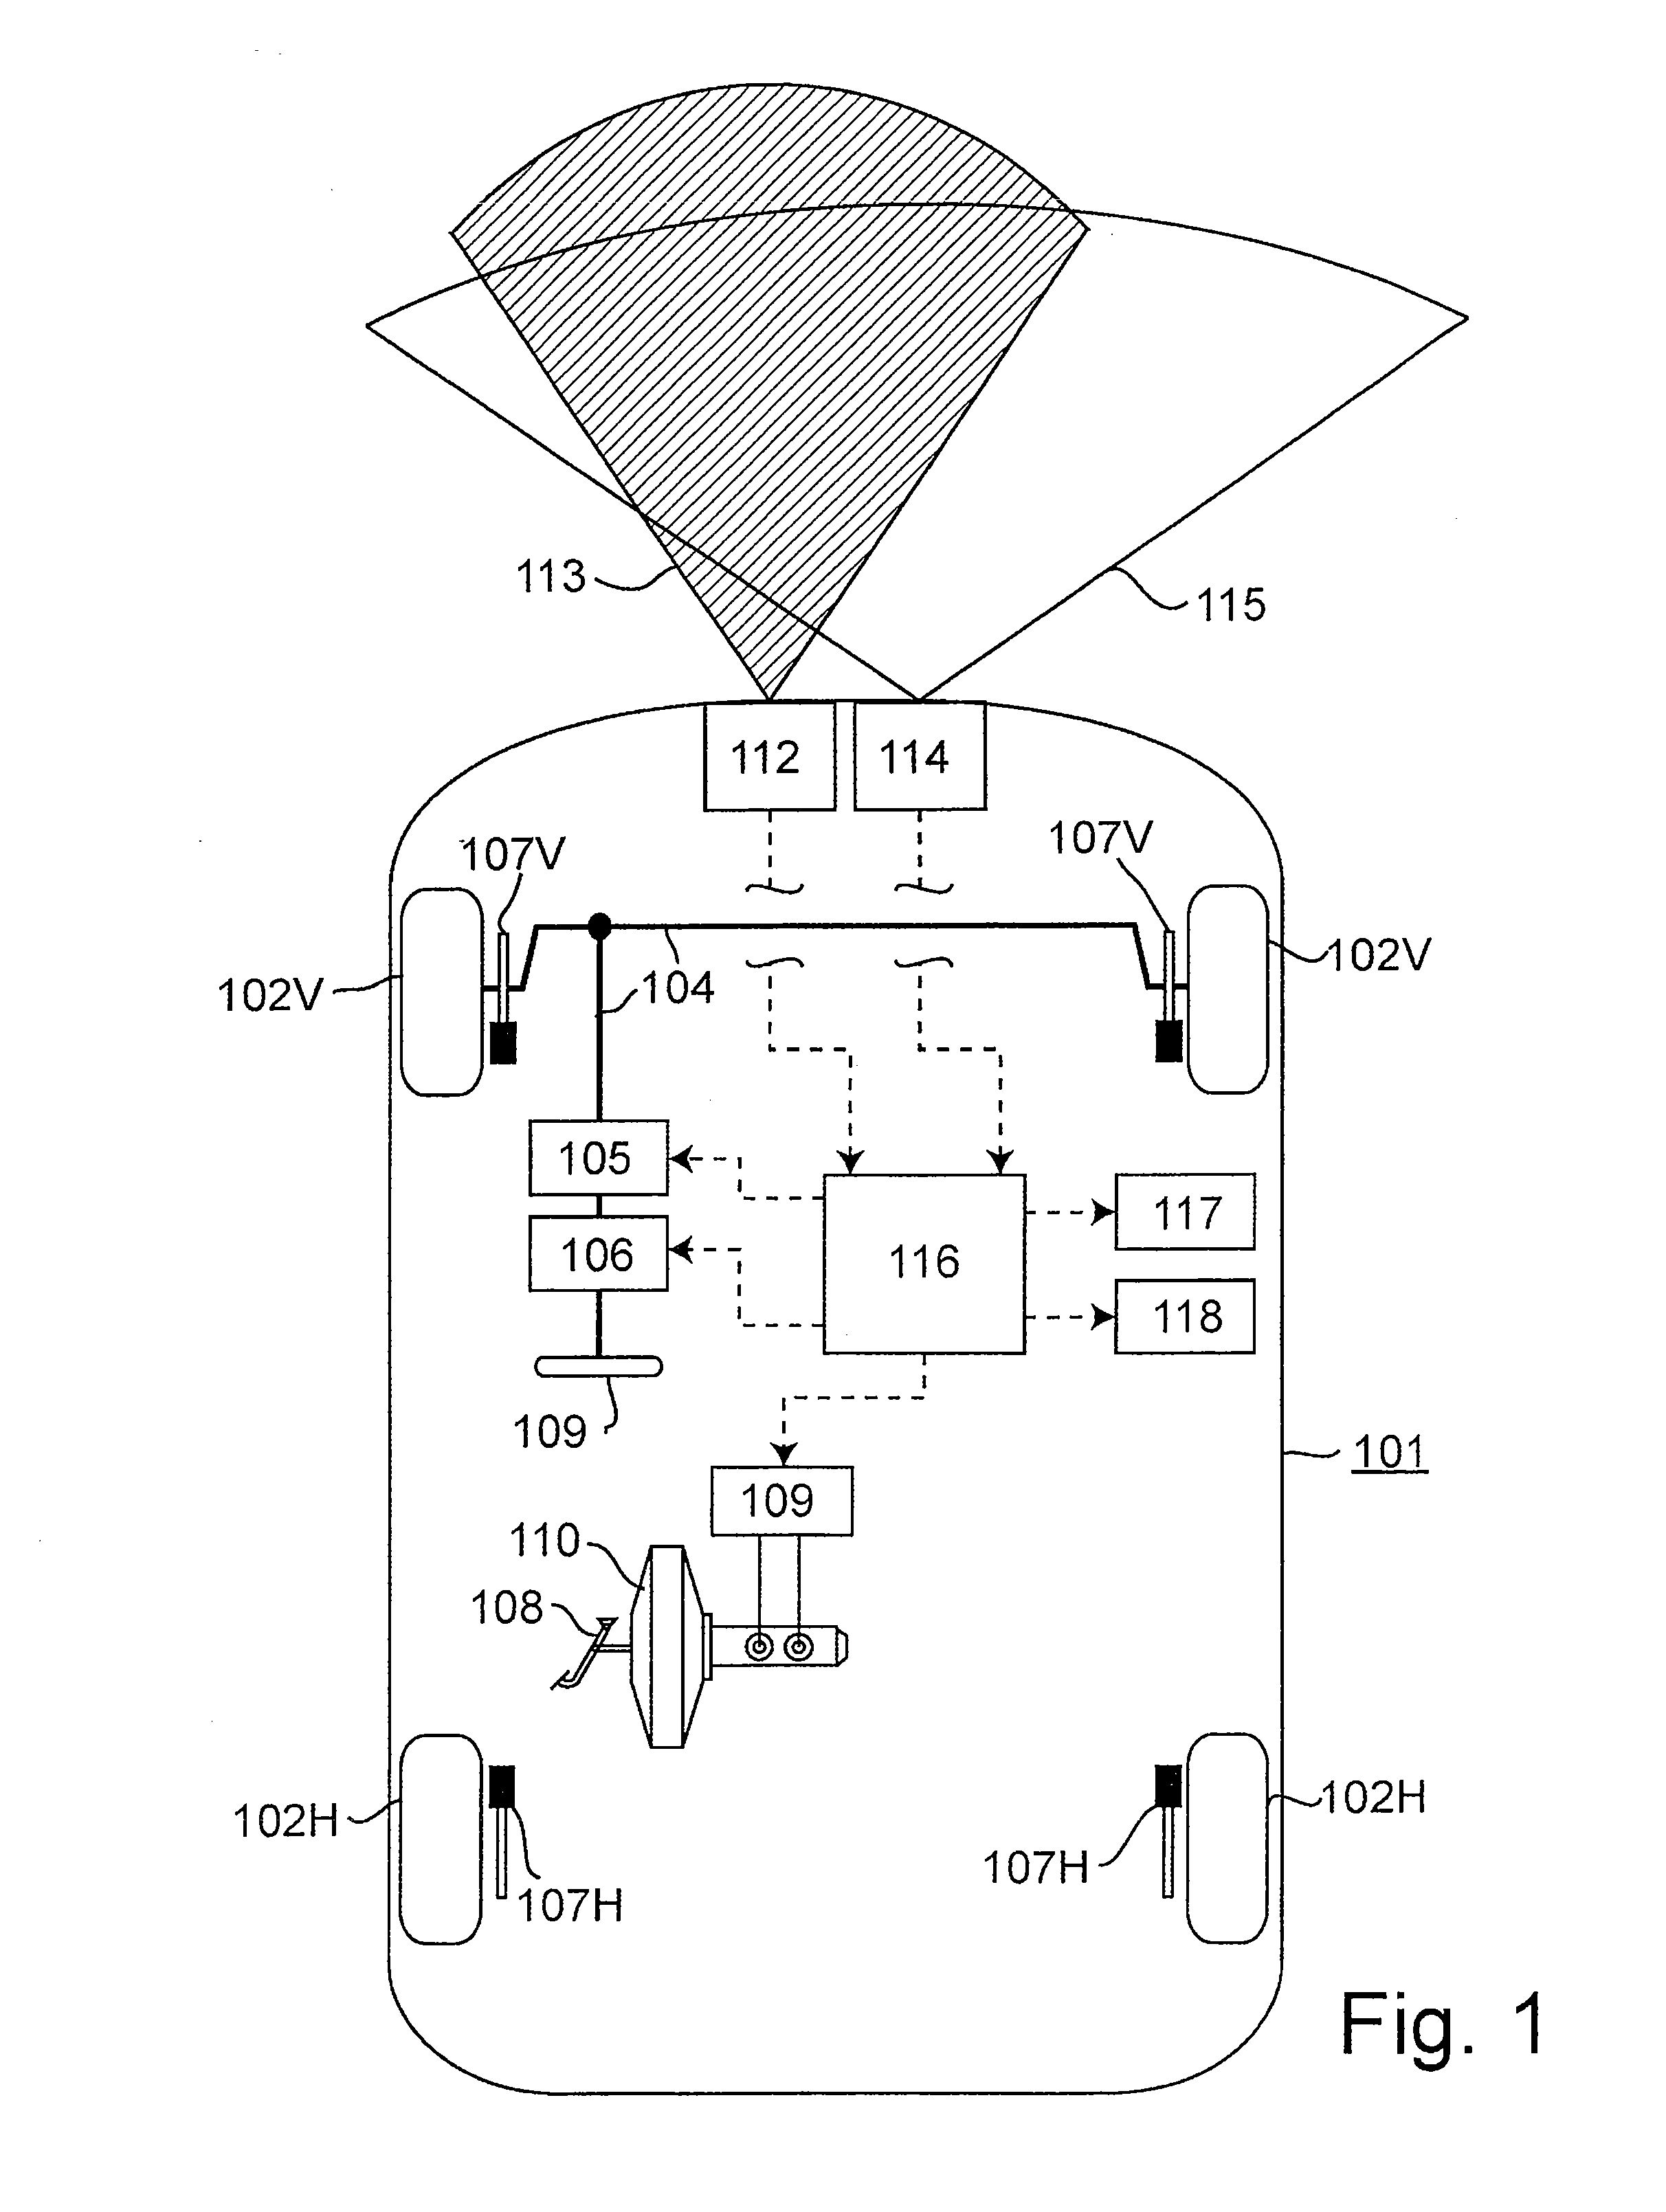 Method and assistance system for detecting objects in the surrounding area of a vehicle